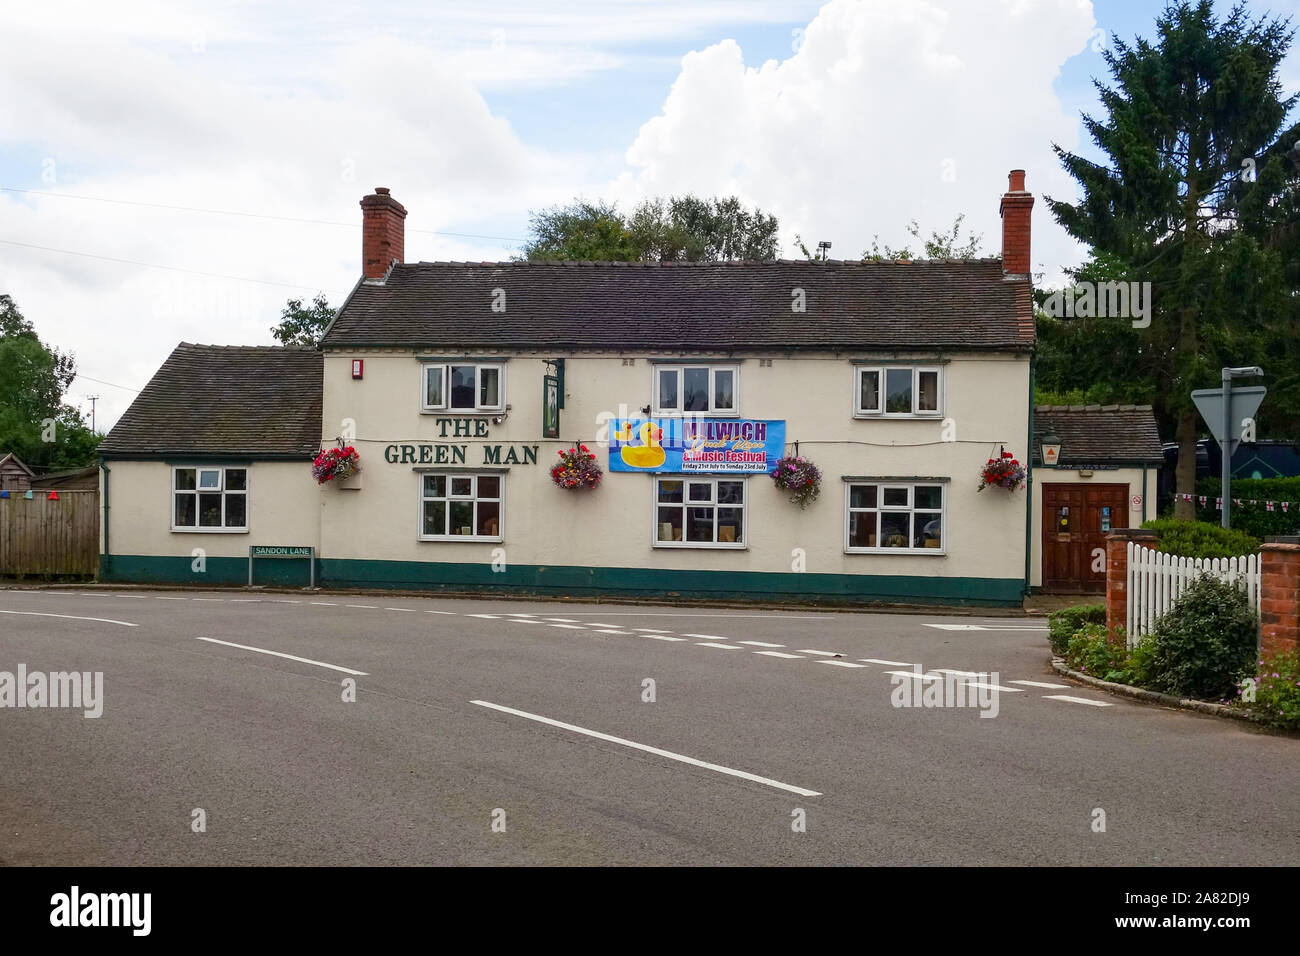 The Green man pub or public house in the village of Milwich, near Stafford, Staffordshire, England, UK Stock Photo